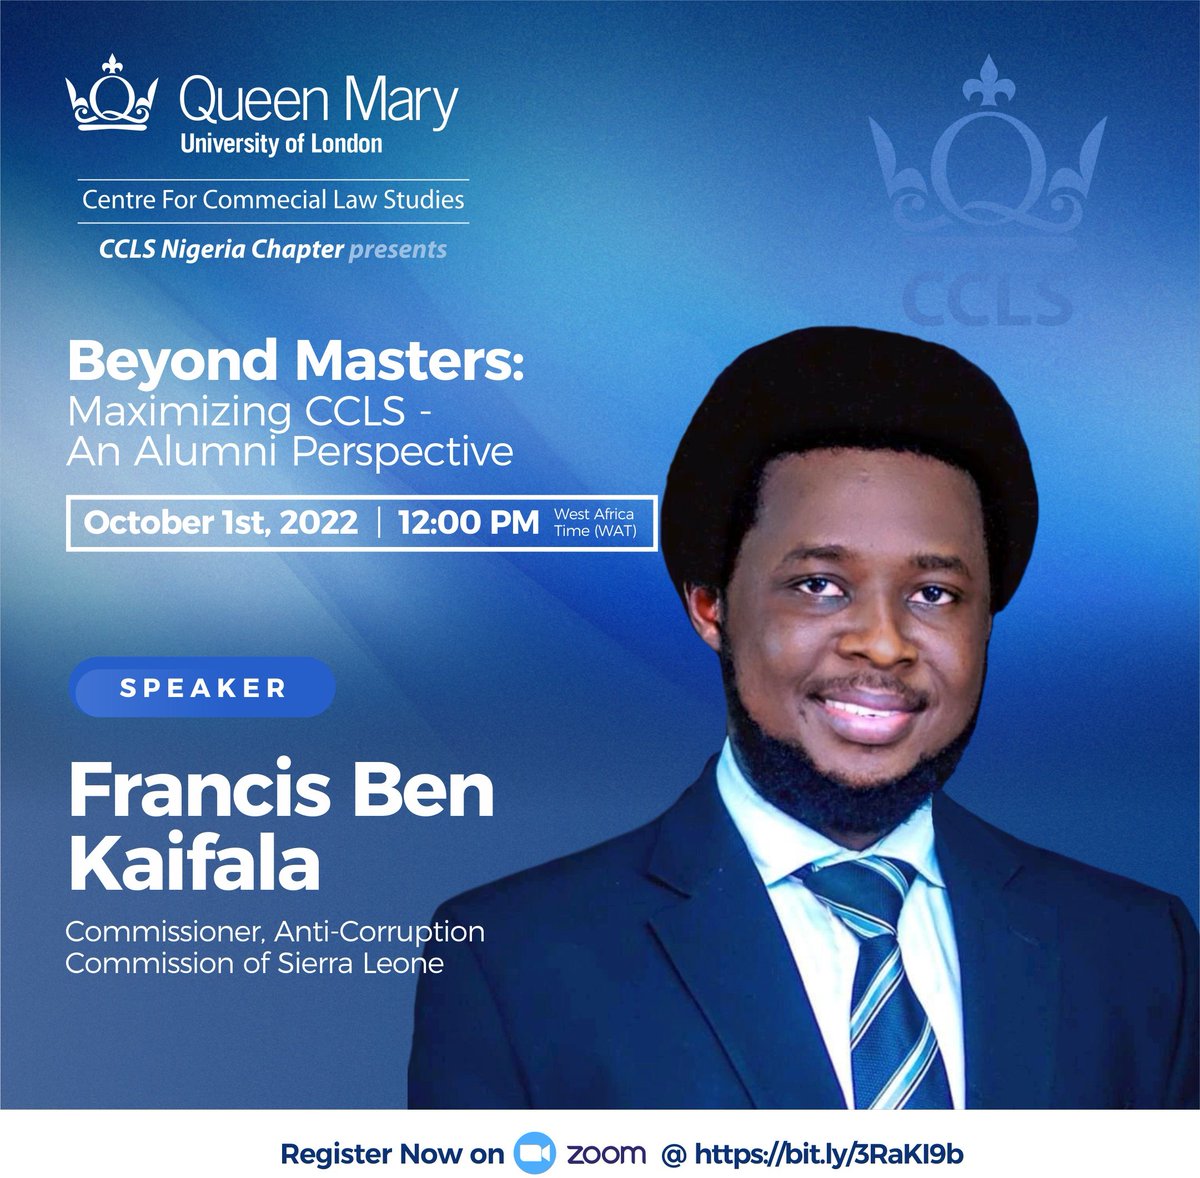 Will be joining the CCLS - Queen Mary University of London's Nigeria Alumni Chapter for a conversation on life after Master's. It's been 7 years of a remarkable journey since my first Master's Degree at CCLS as a Multiple Award-Winning lawyer, activist, scholar and State Actor.